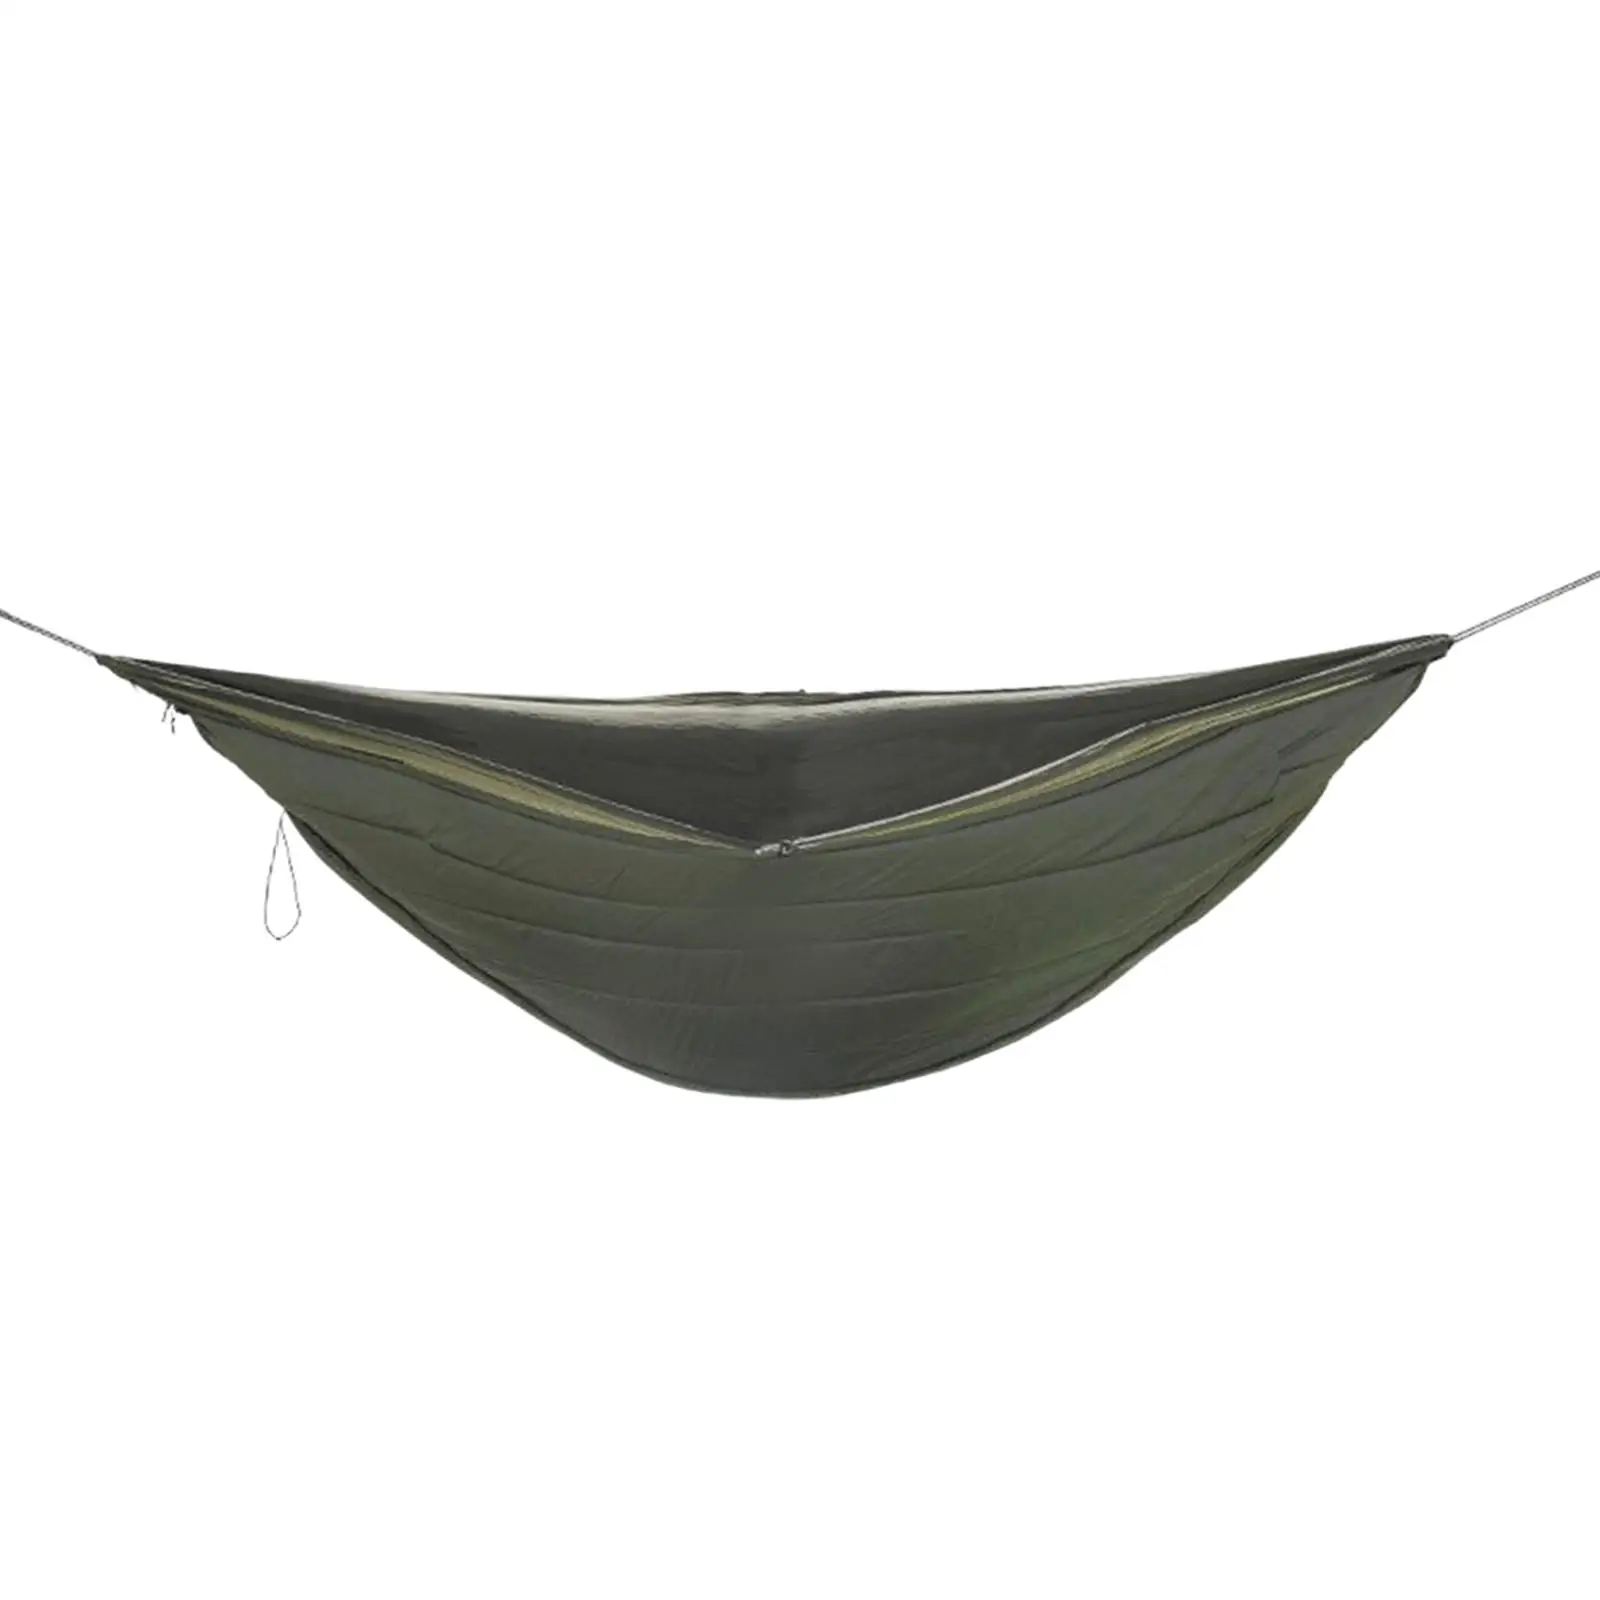 Hammock Underquilt Large Under Blanket Lightweight Full Length Camping Sleeping Hammock for Fishing Backpacking Outdoor Beach